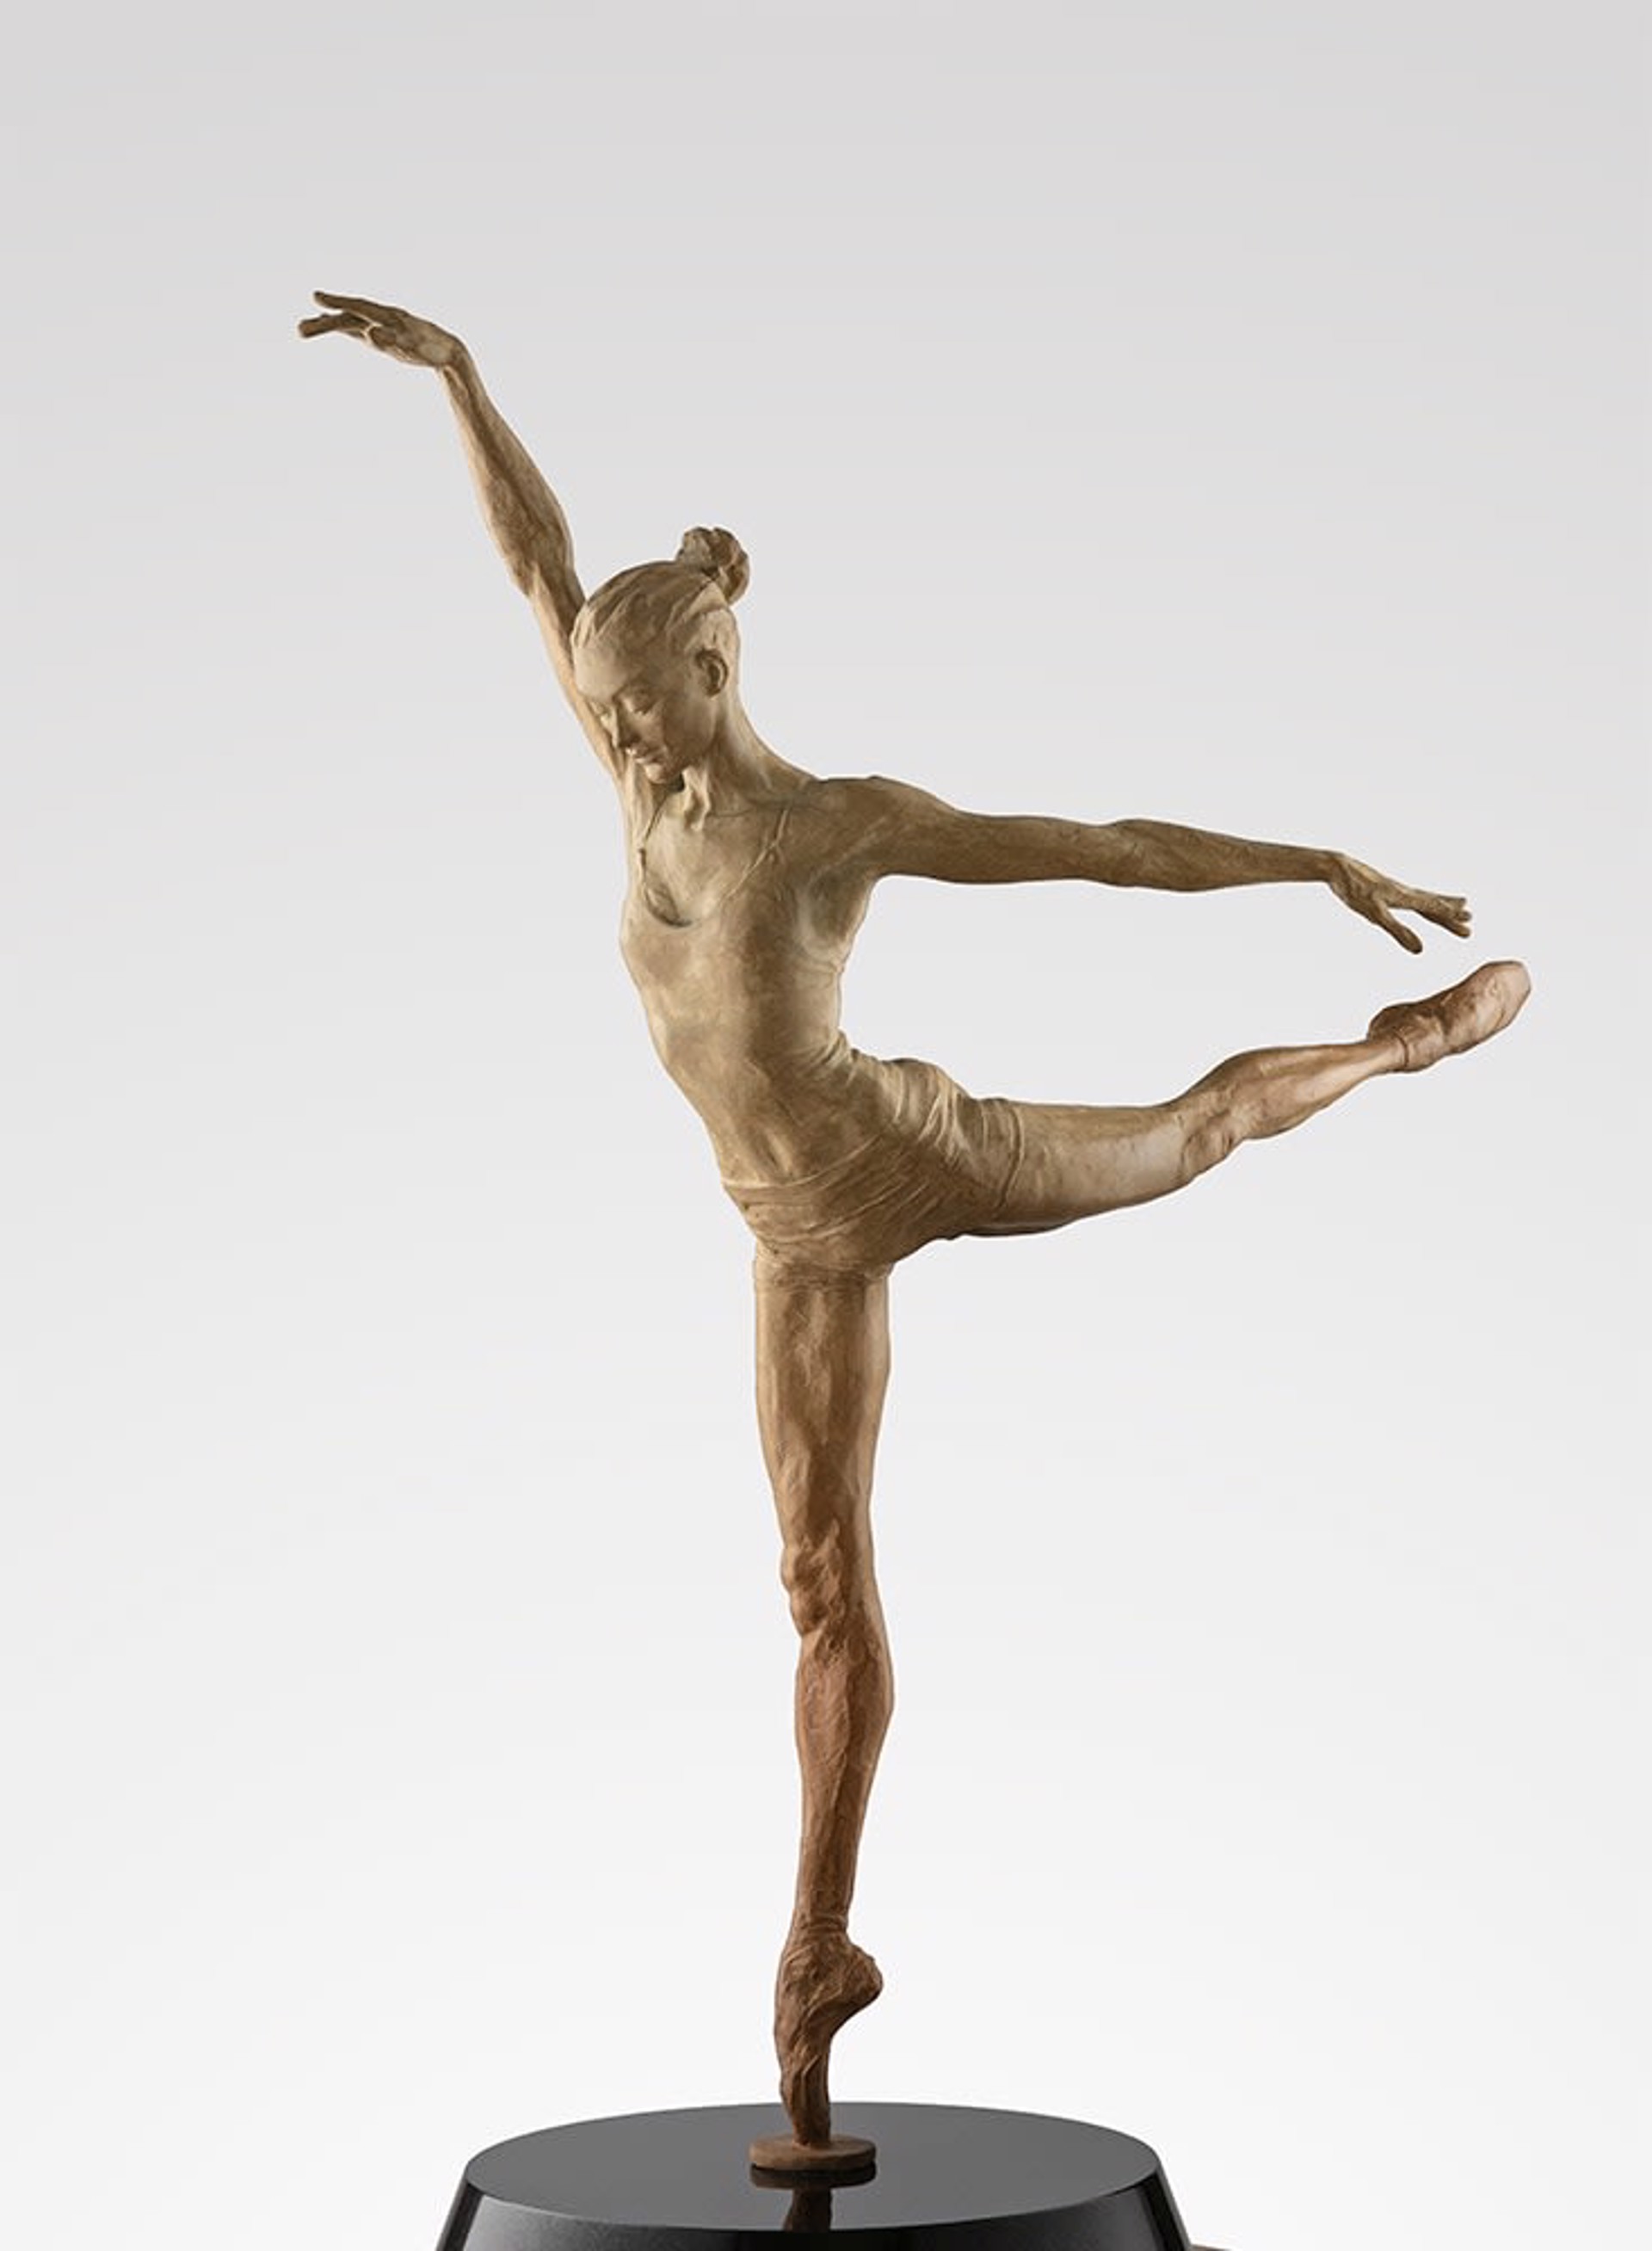 Academia (Maquette) by Paige Bradley